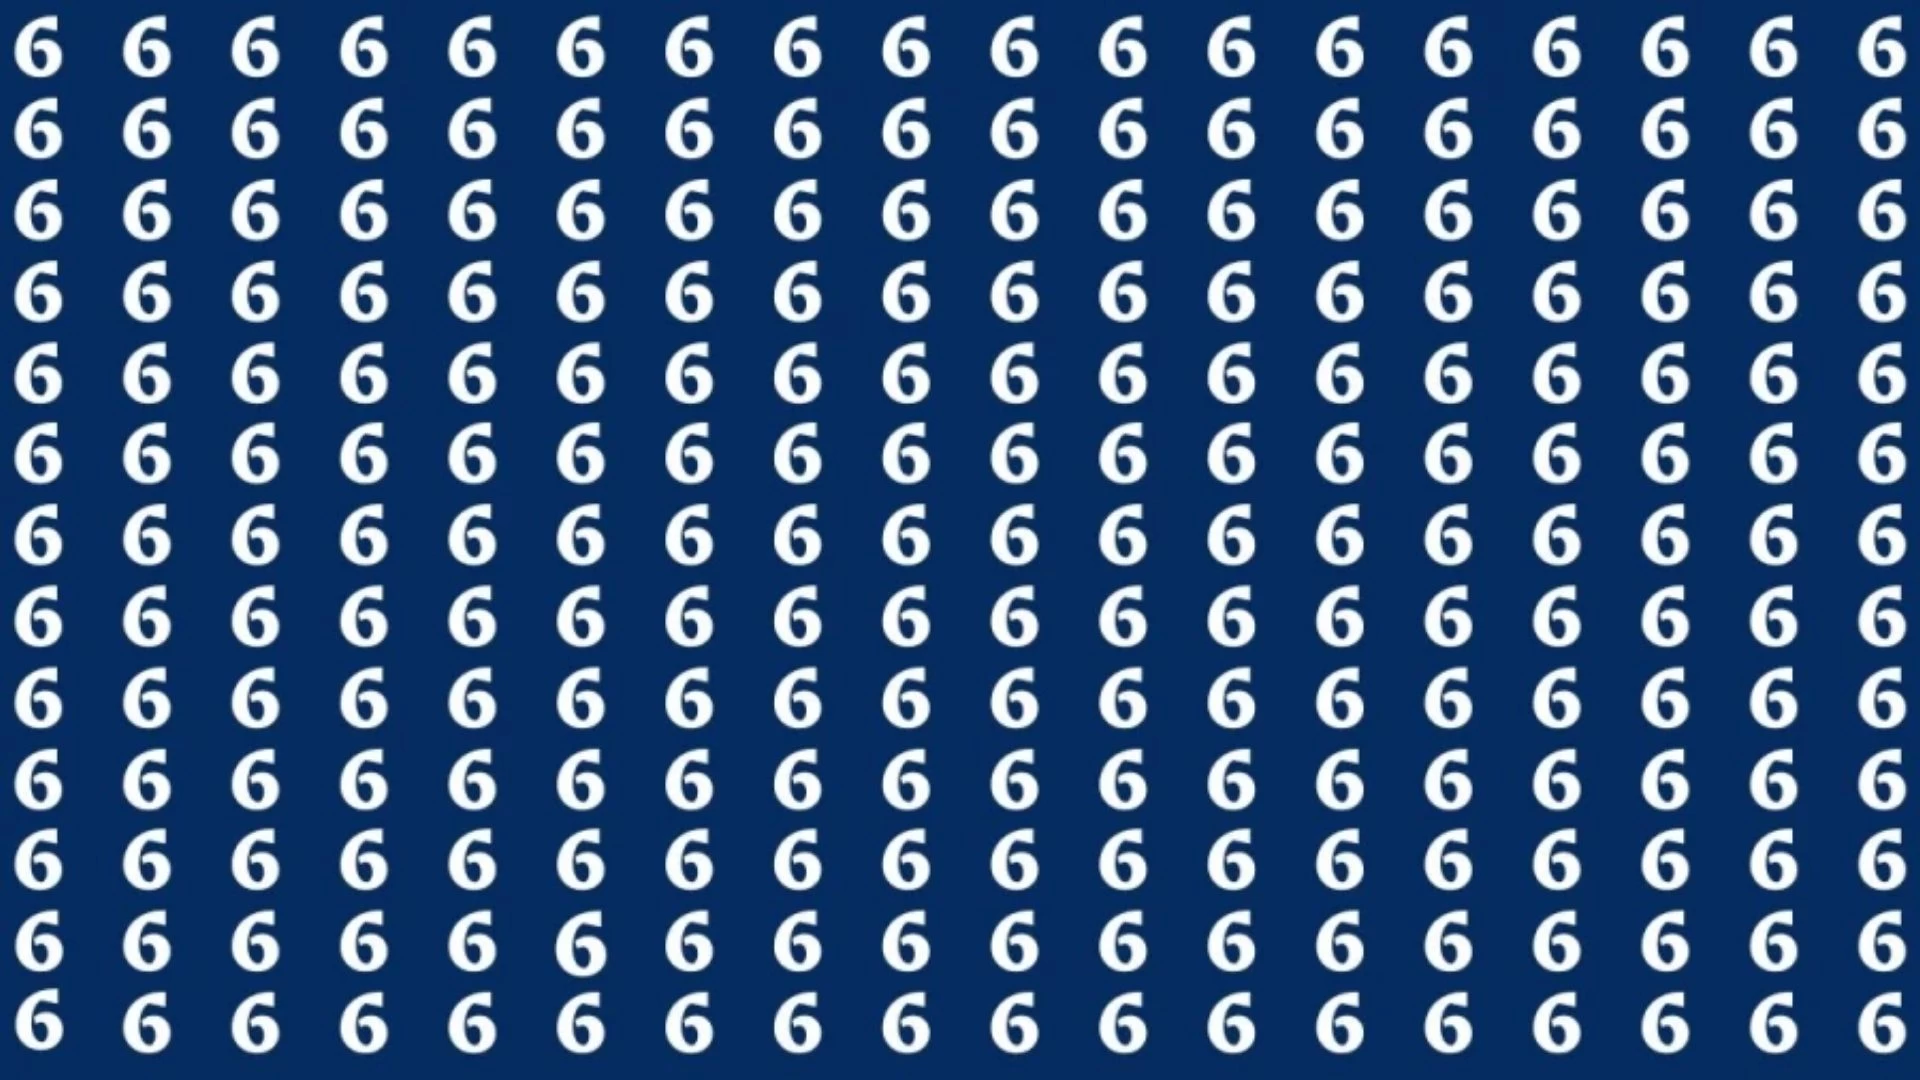 Brain Teasers for Geniuses: Find 2 among the 6s within 20 Seconds?